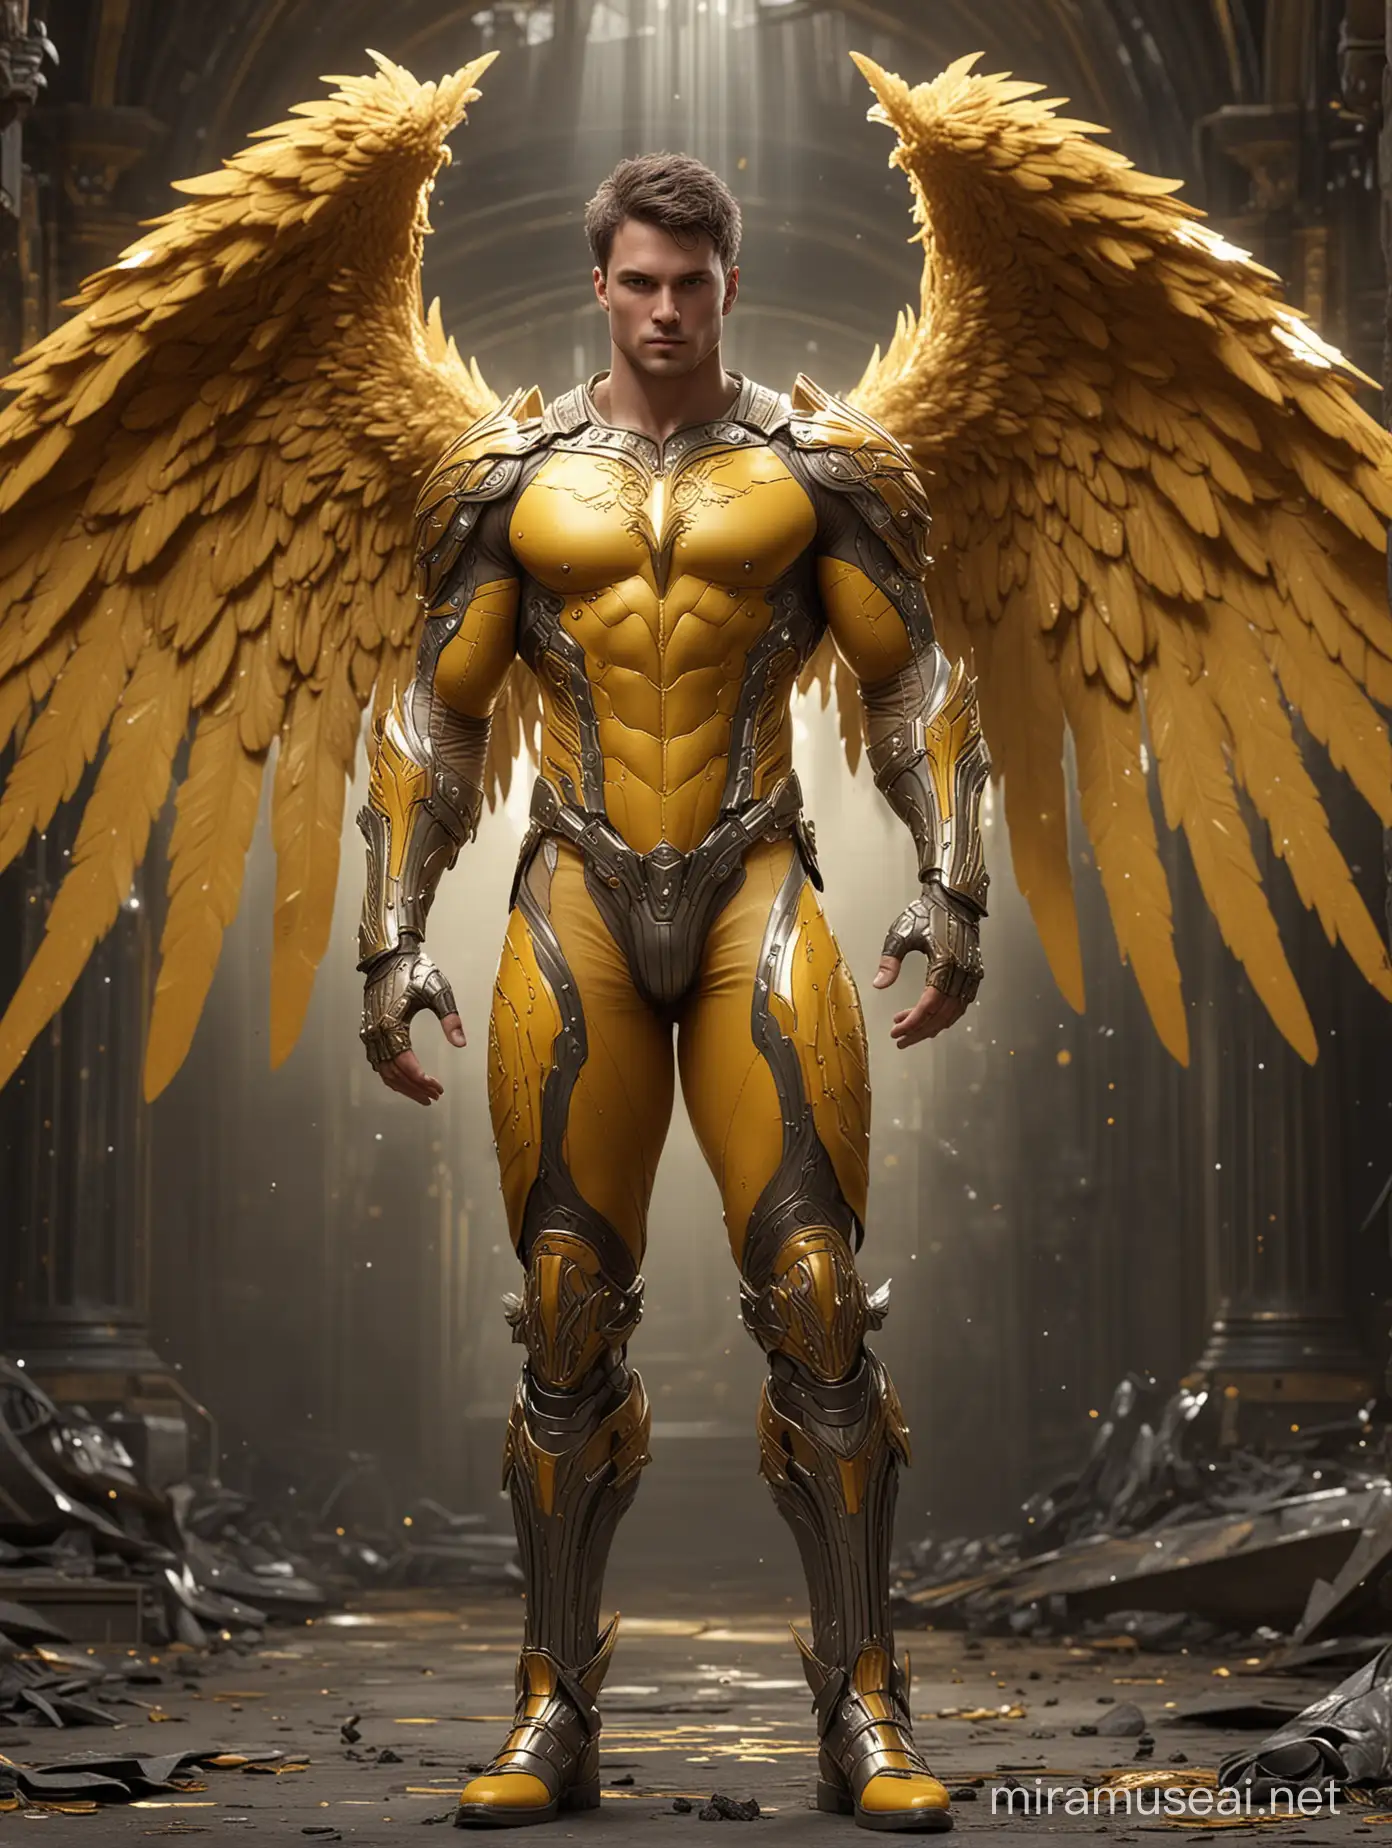 Handsome Masculine Fractal Archangel in Yellow Bodysuit with Massive Sparkling Wings